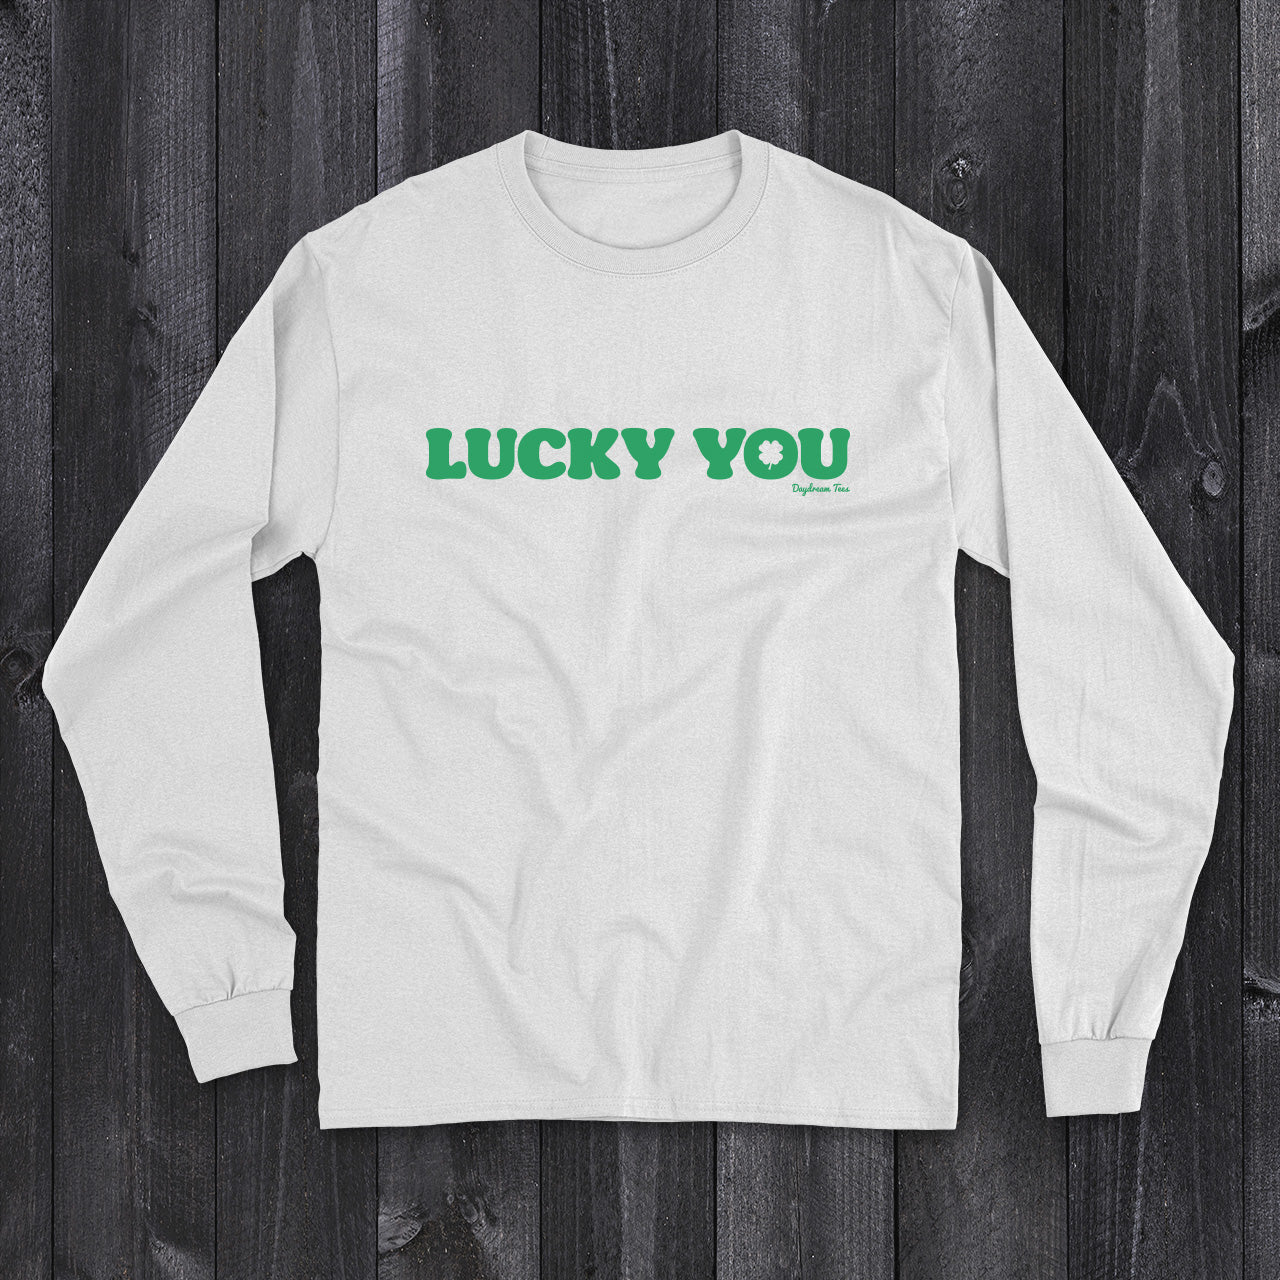 Daydream Tees Lucky You